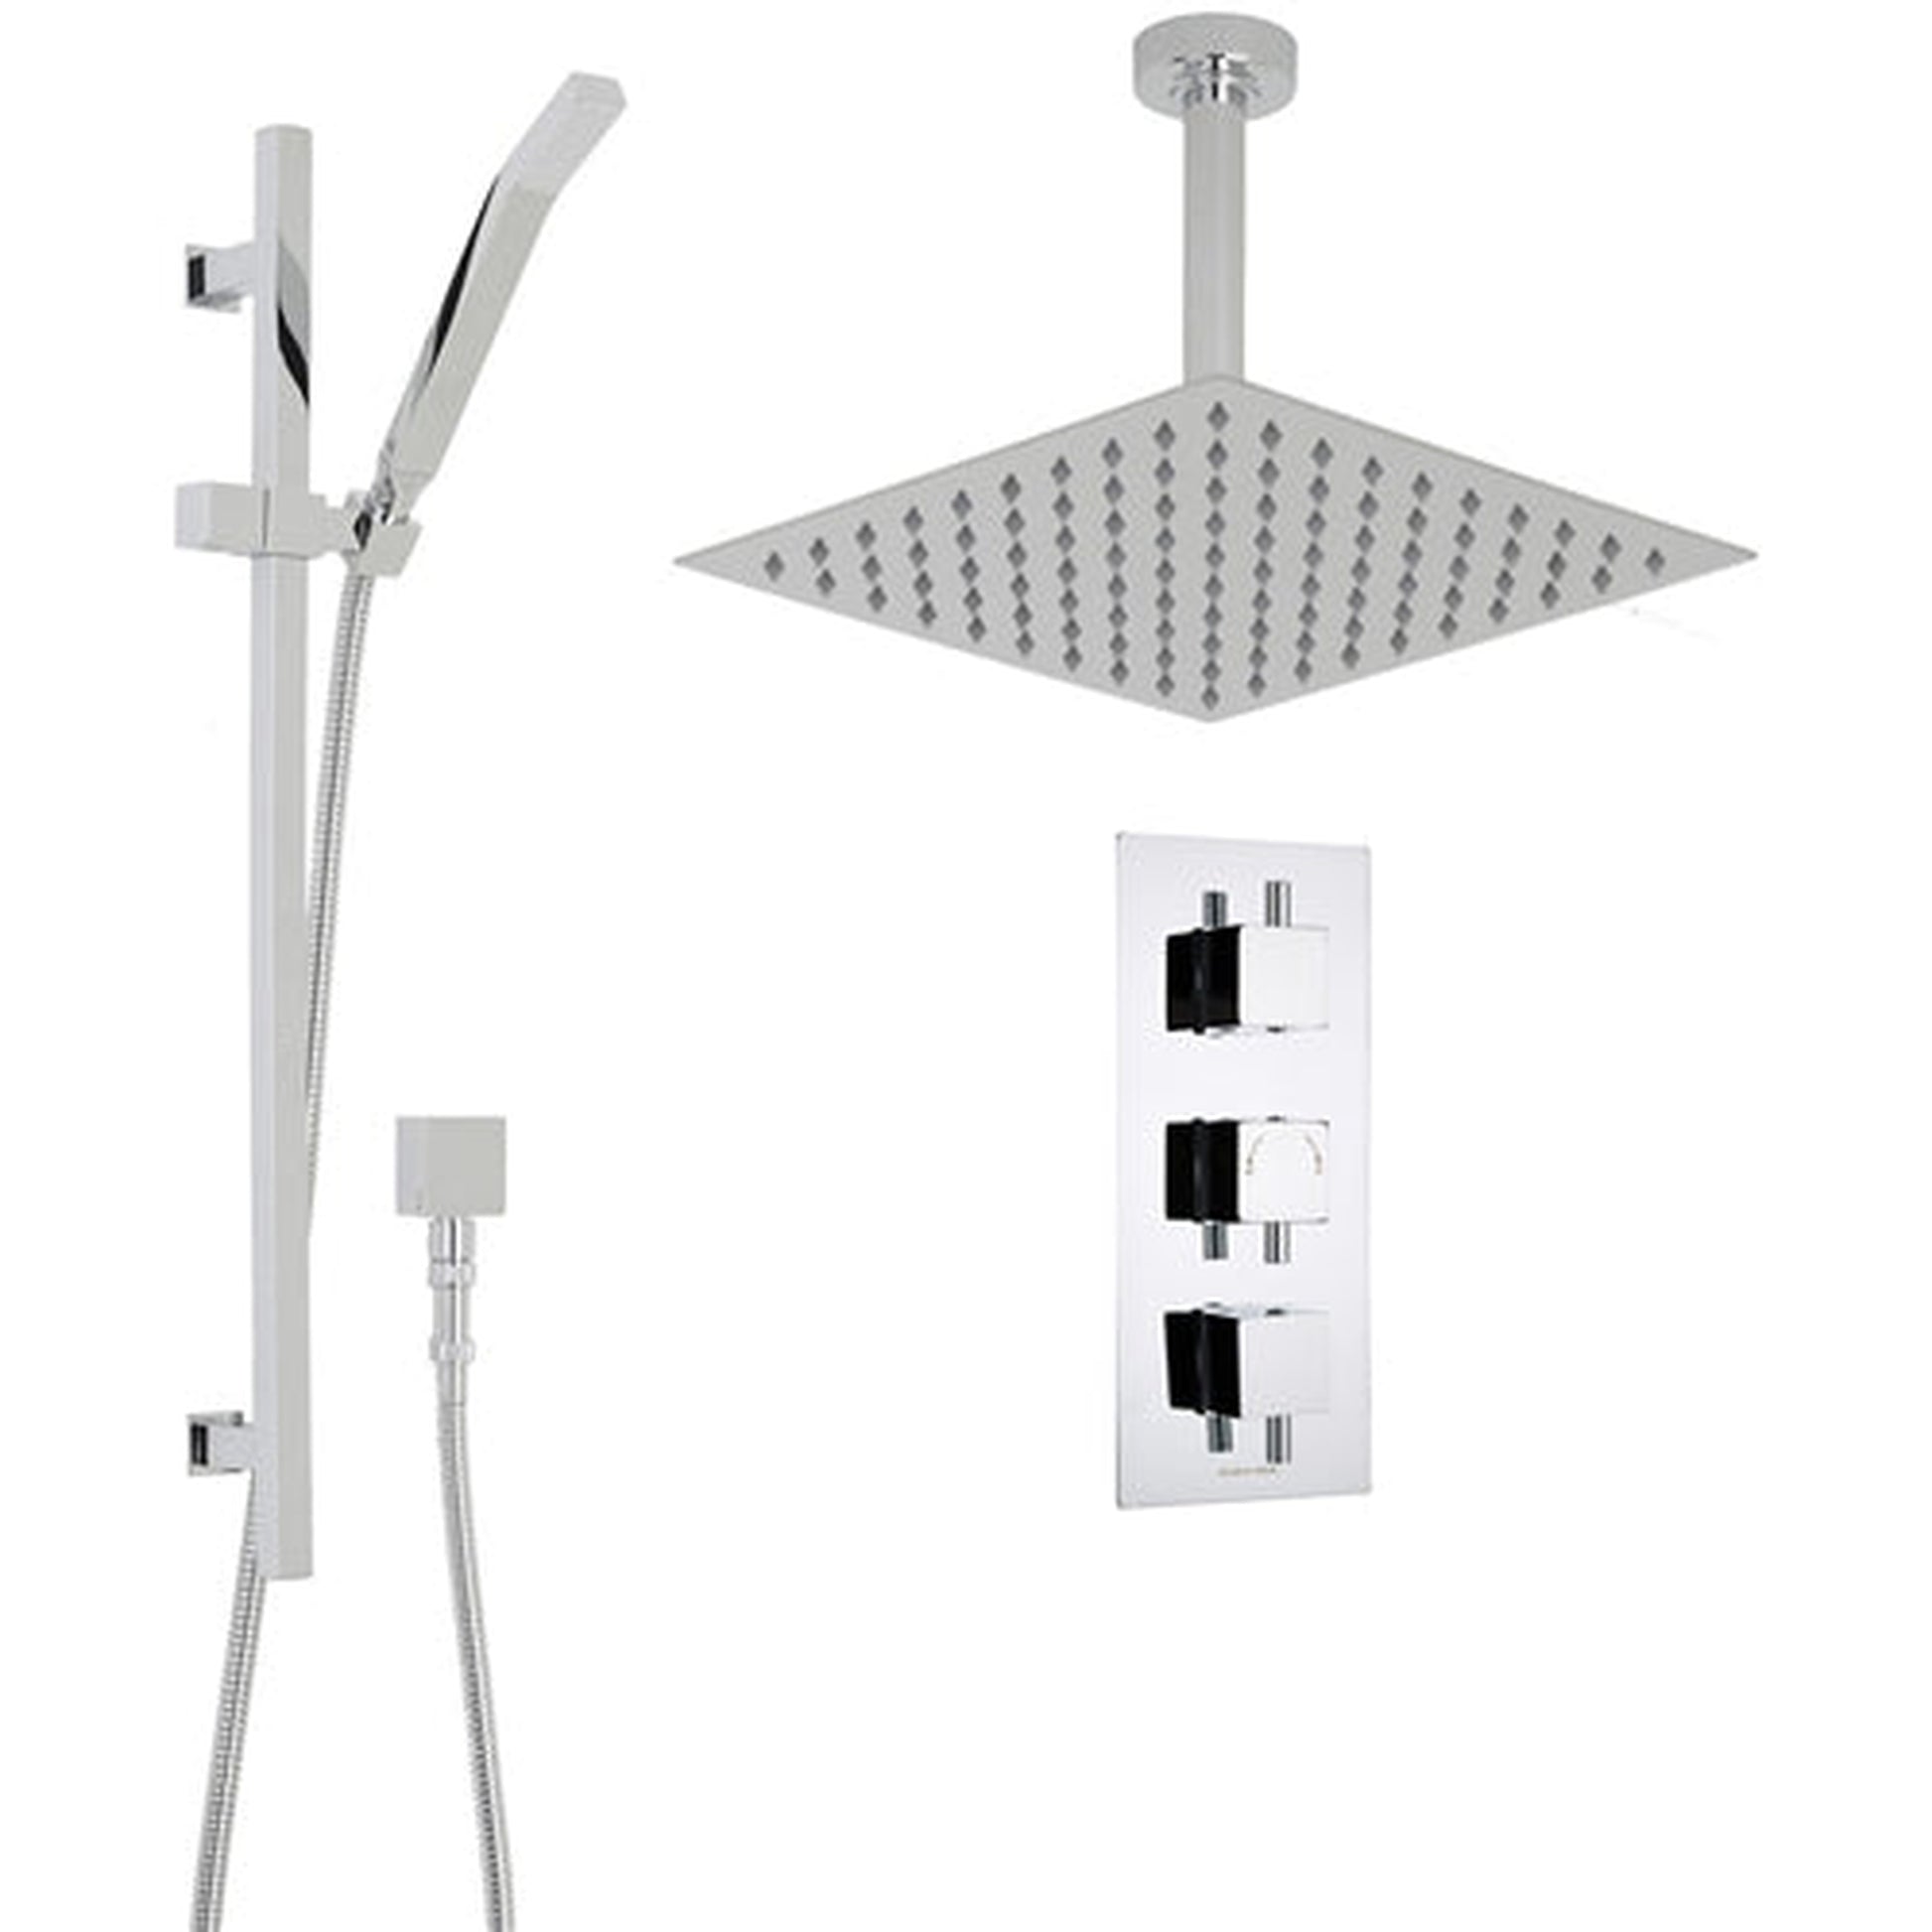 Fontana Liverpool 10" Chrome Round Ceiling Mounted Thermostatic Rainfall Shower System With Hand Shower and With Water Powered LED Lights